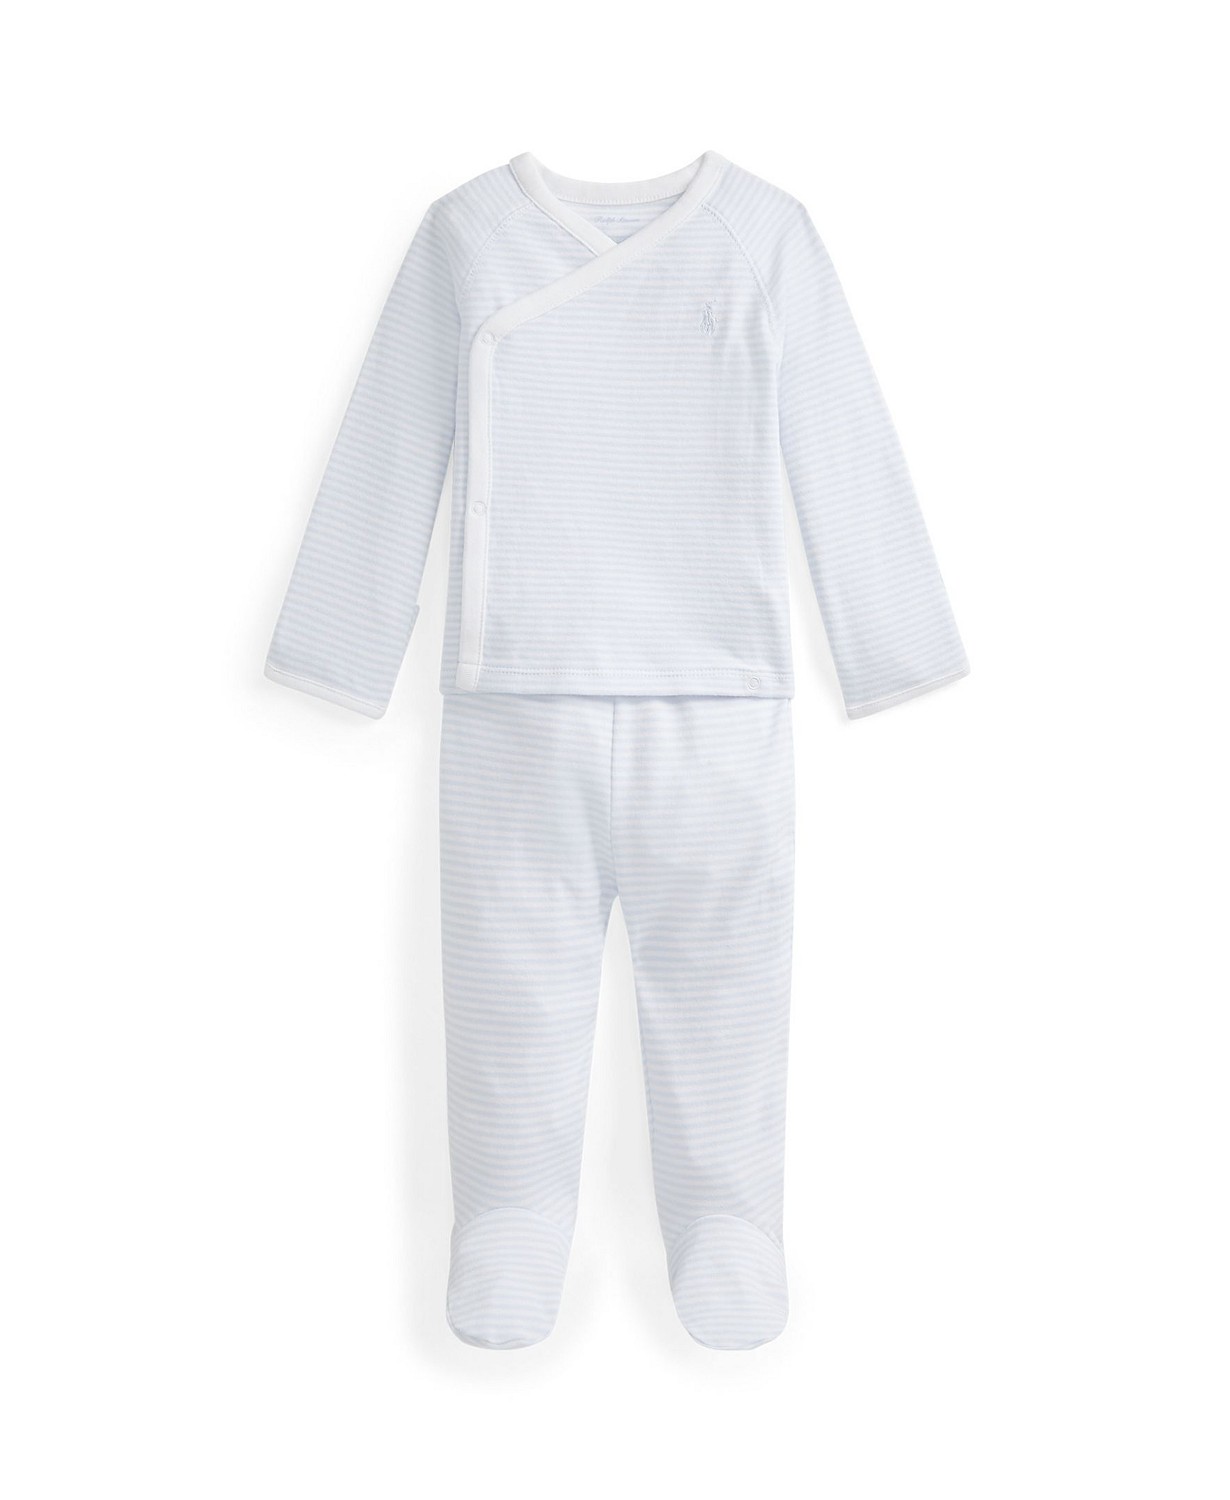 Baby Boys Striped Organic Cotton Top and Pant Set, 2 Piece